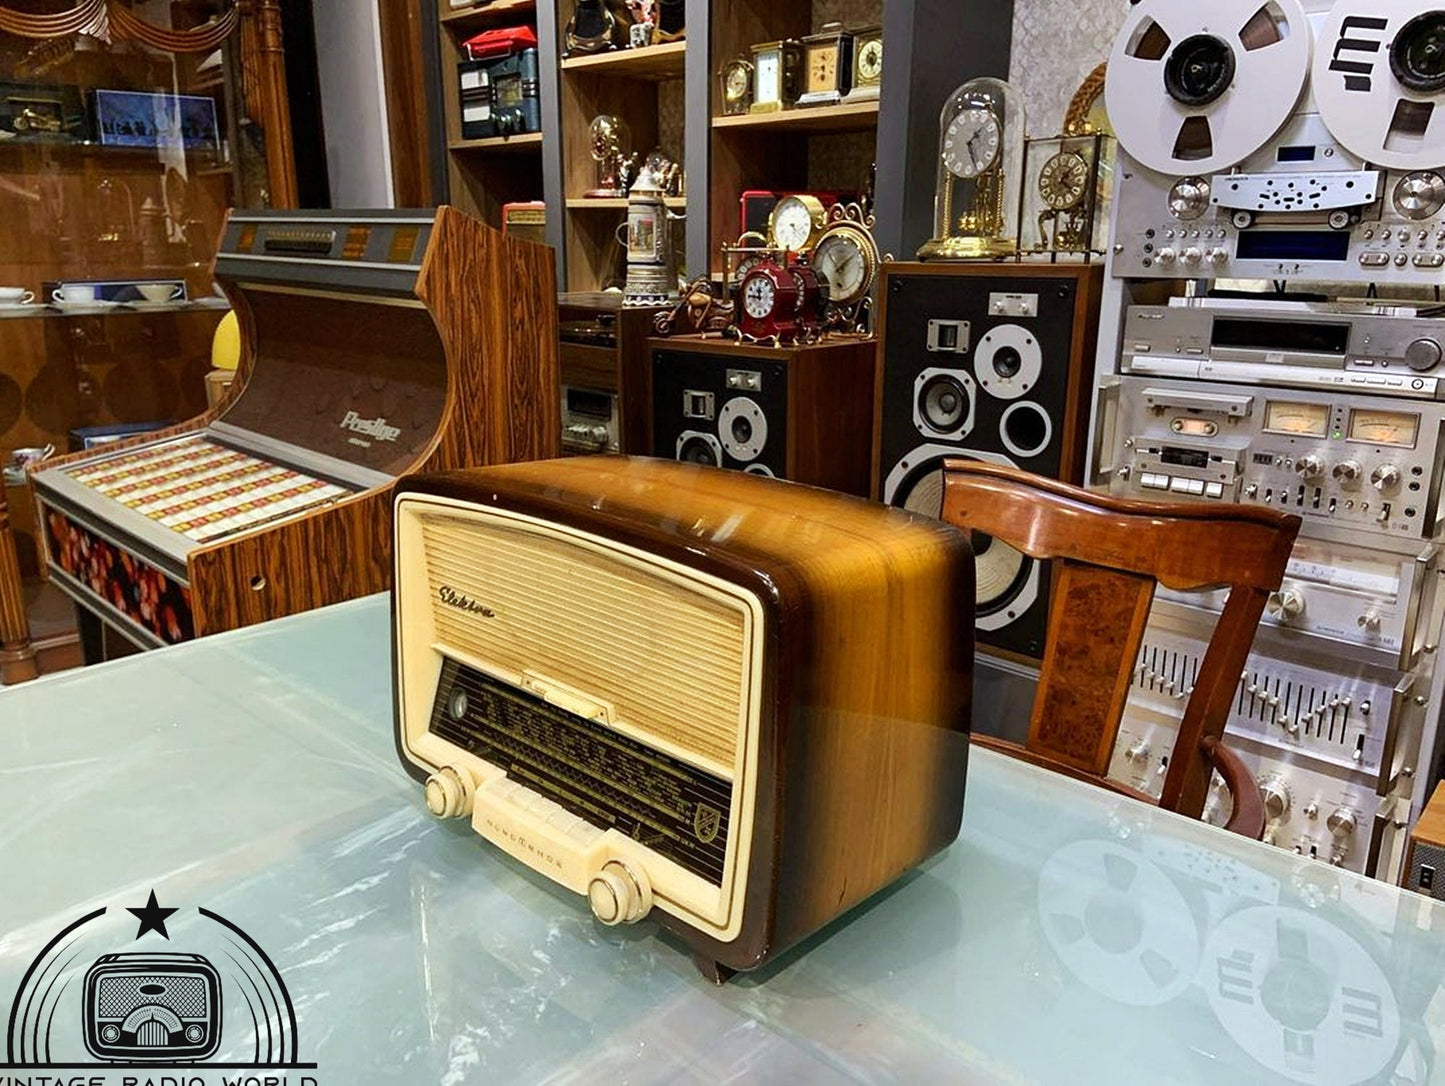 Nordmende Elektra Radio - Vintage Charm with Original Design and Lamp Feature